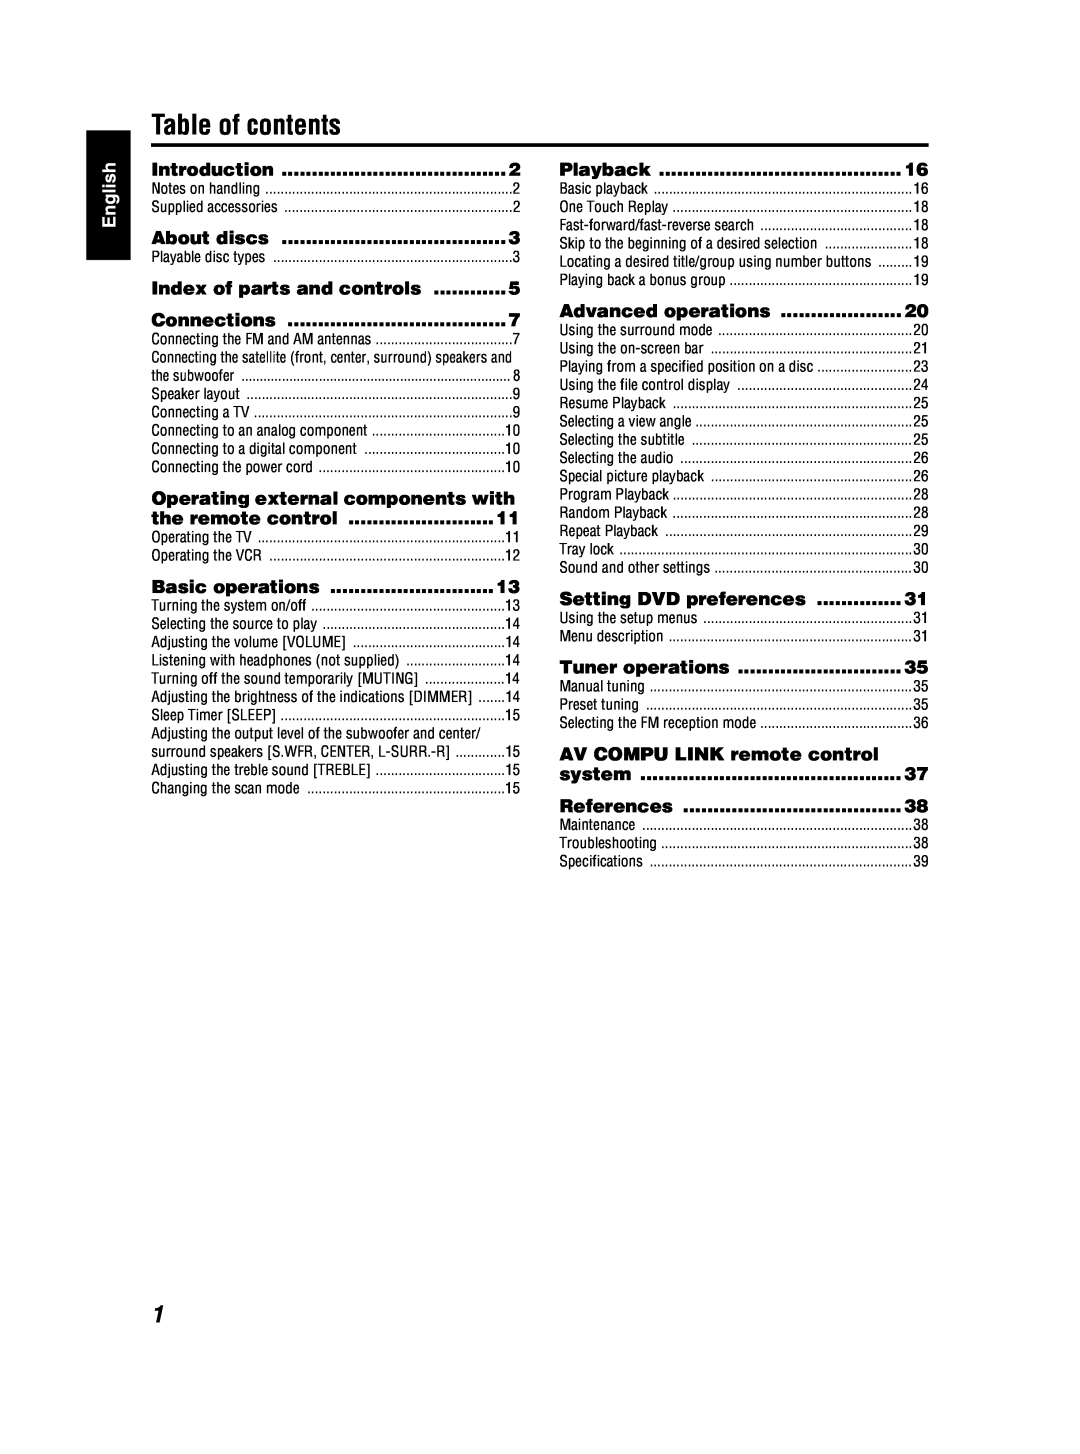 JVC TH-S2 manual Table of contents, Introduction, About discs, Index of parts and controls, Connections, the remote control 